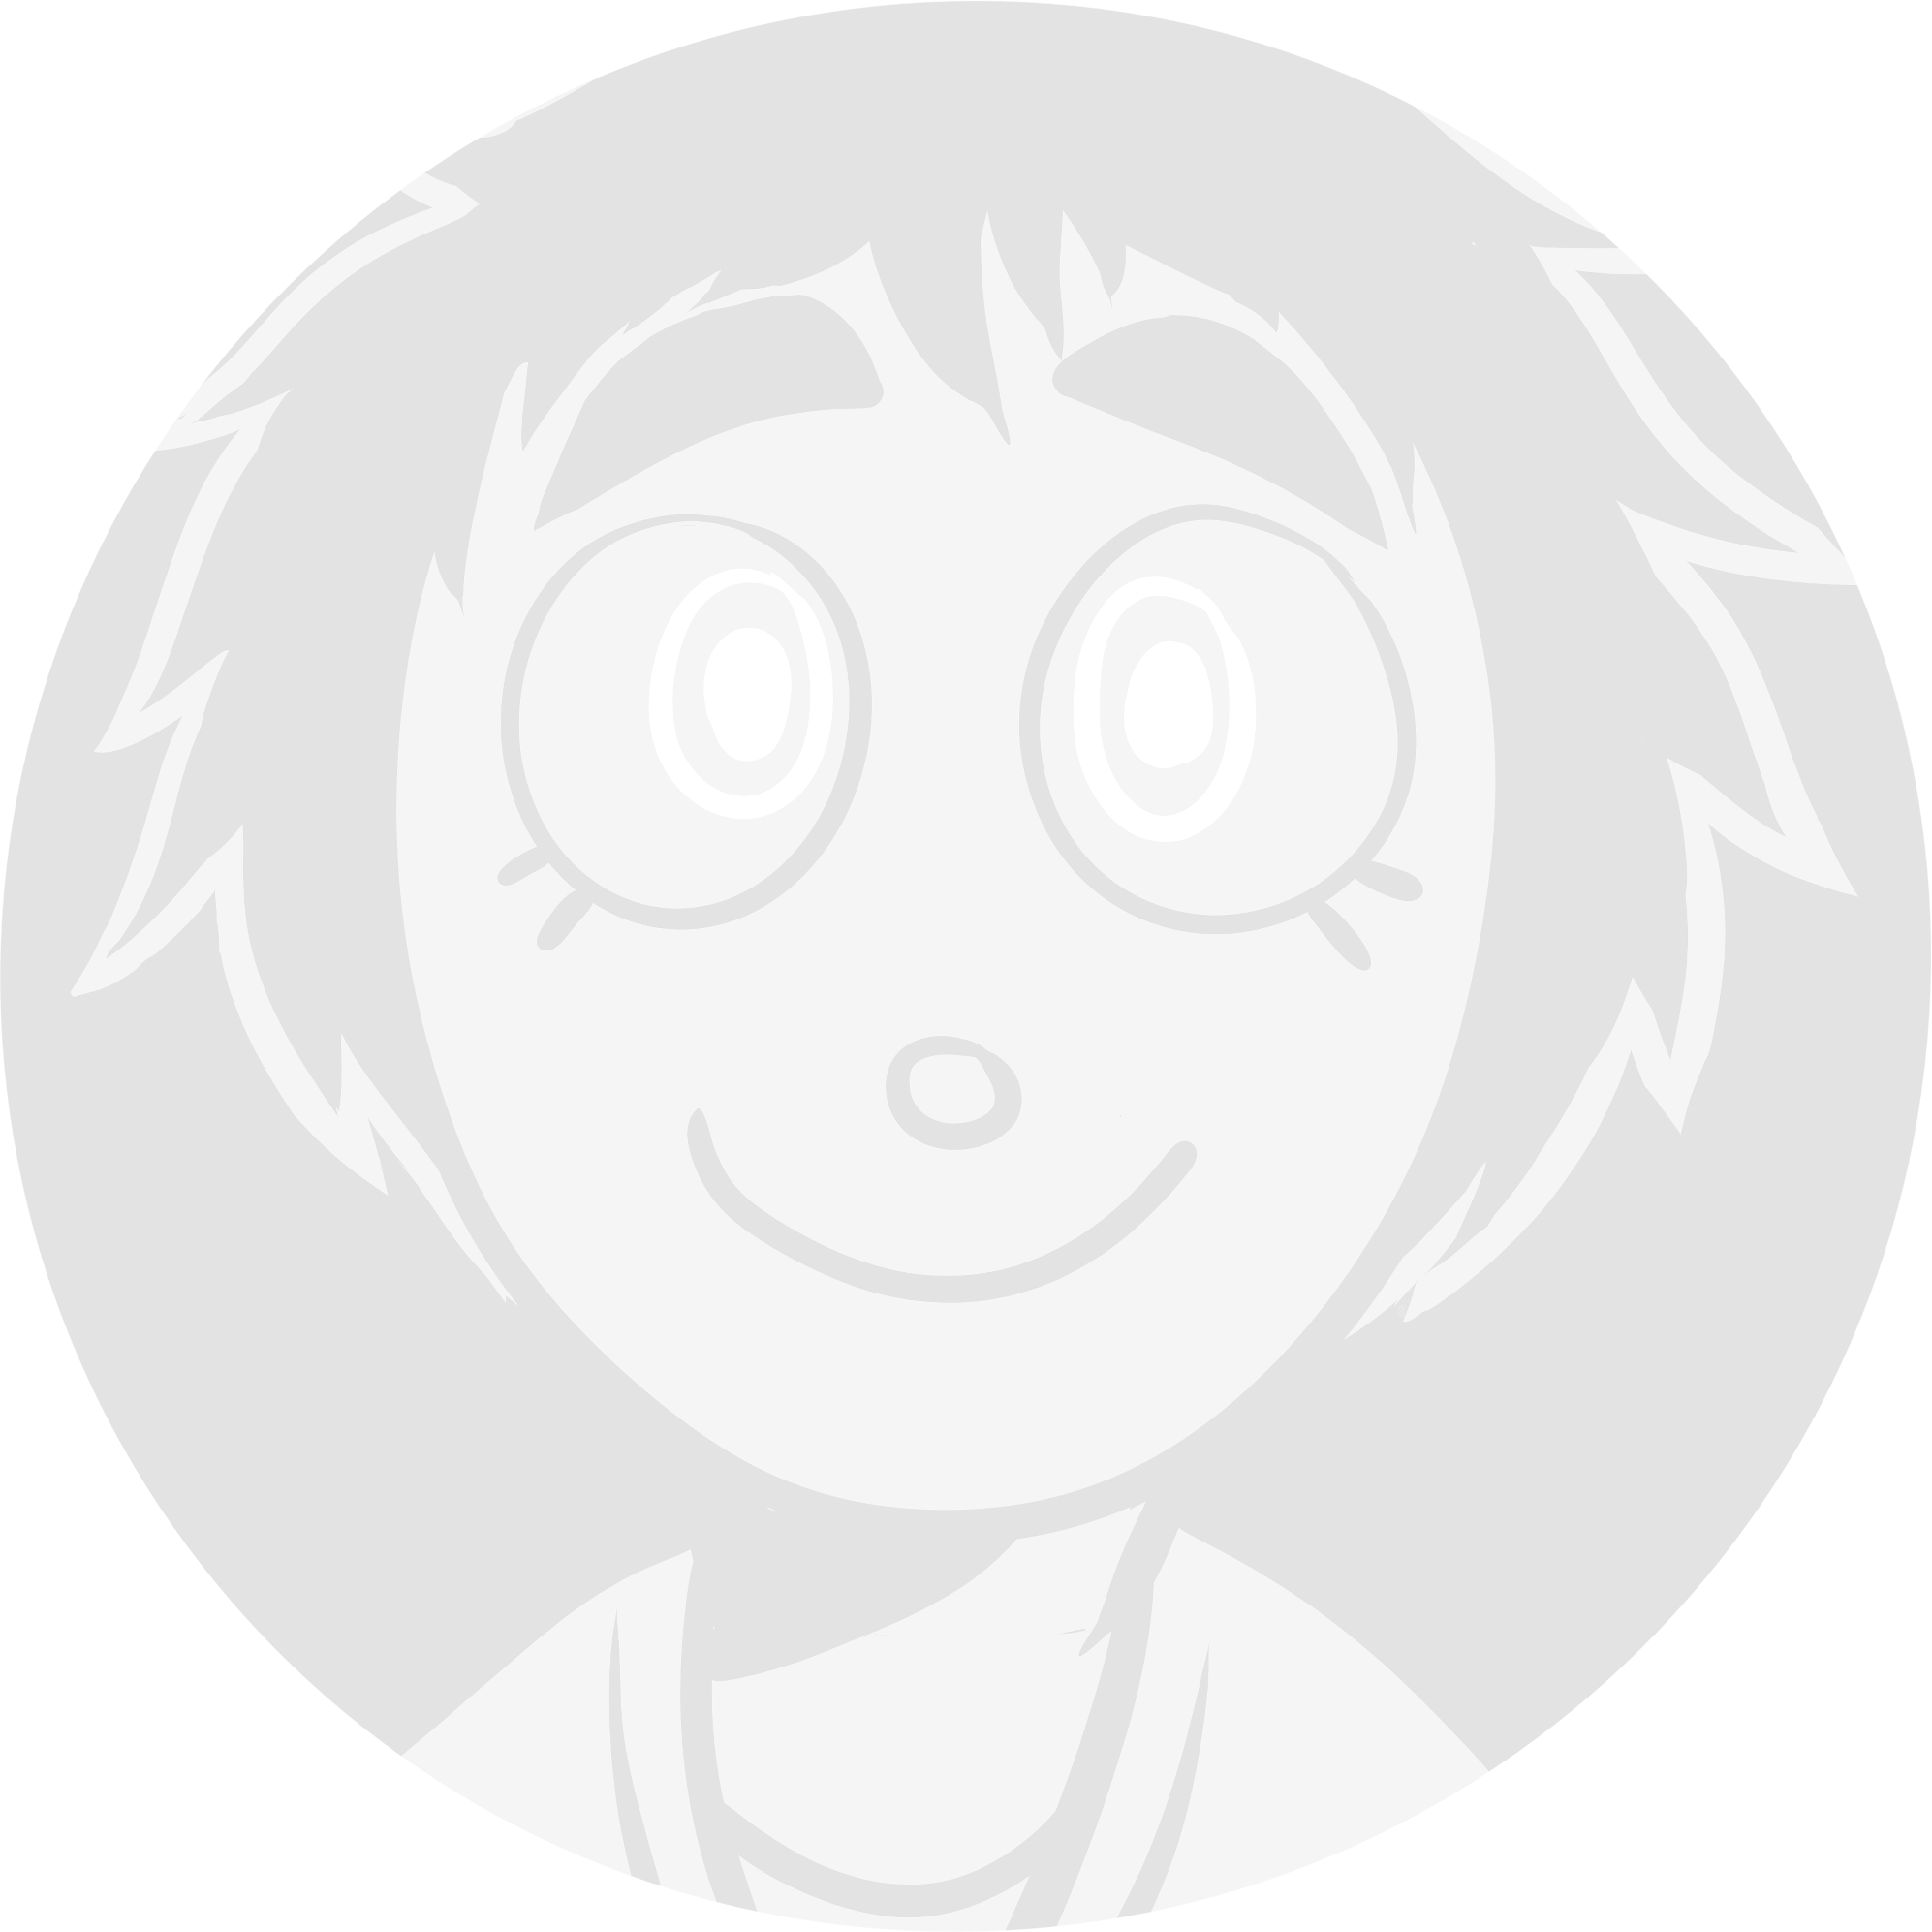 Image of Miss. White. Her hair is dark and shaggy, and she has wide white-colored eyes. She has lashes only on the bottom corner of her eyes, thick dark eyebrows and a circular nose. If you ask she will hug you.